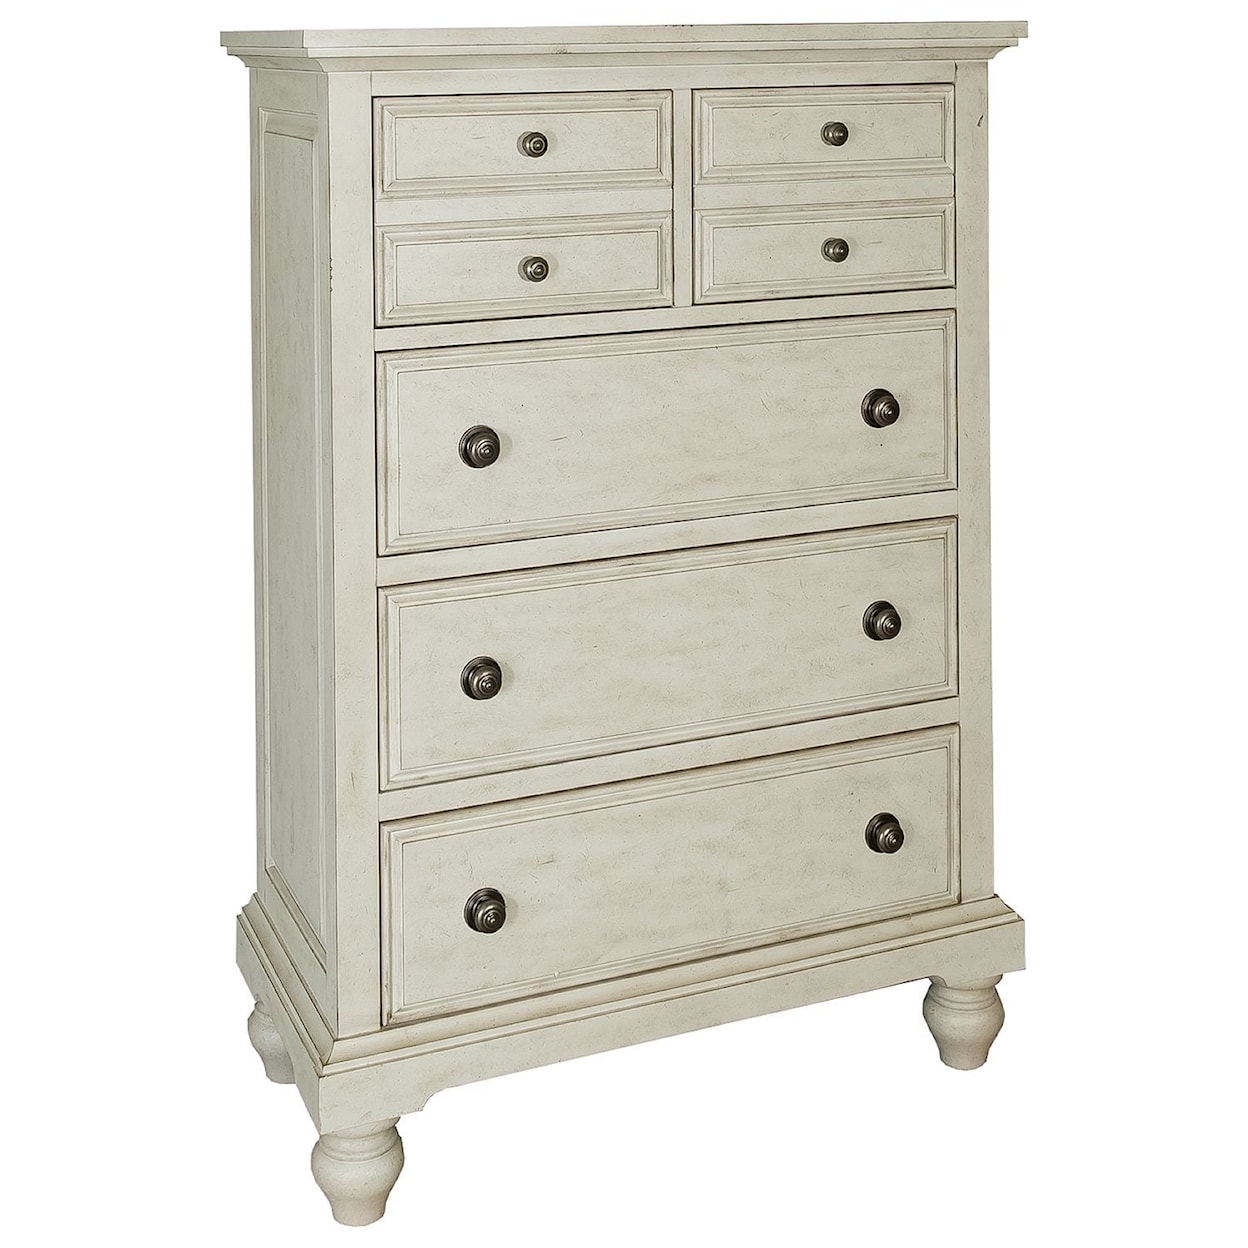 Liberty Furniture High Country Queen Bedroom Set